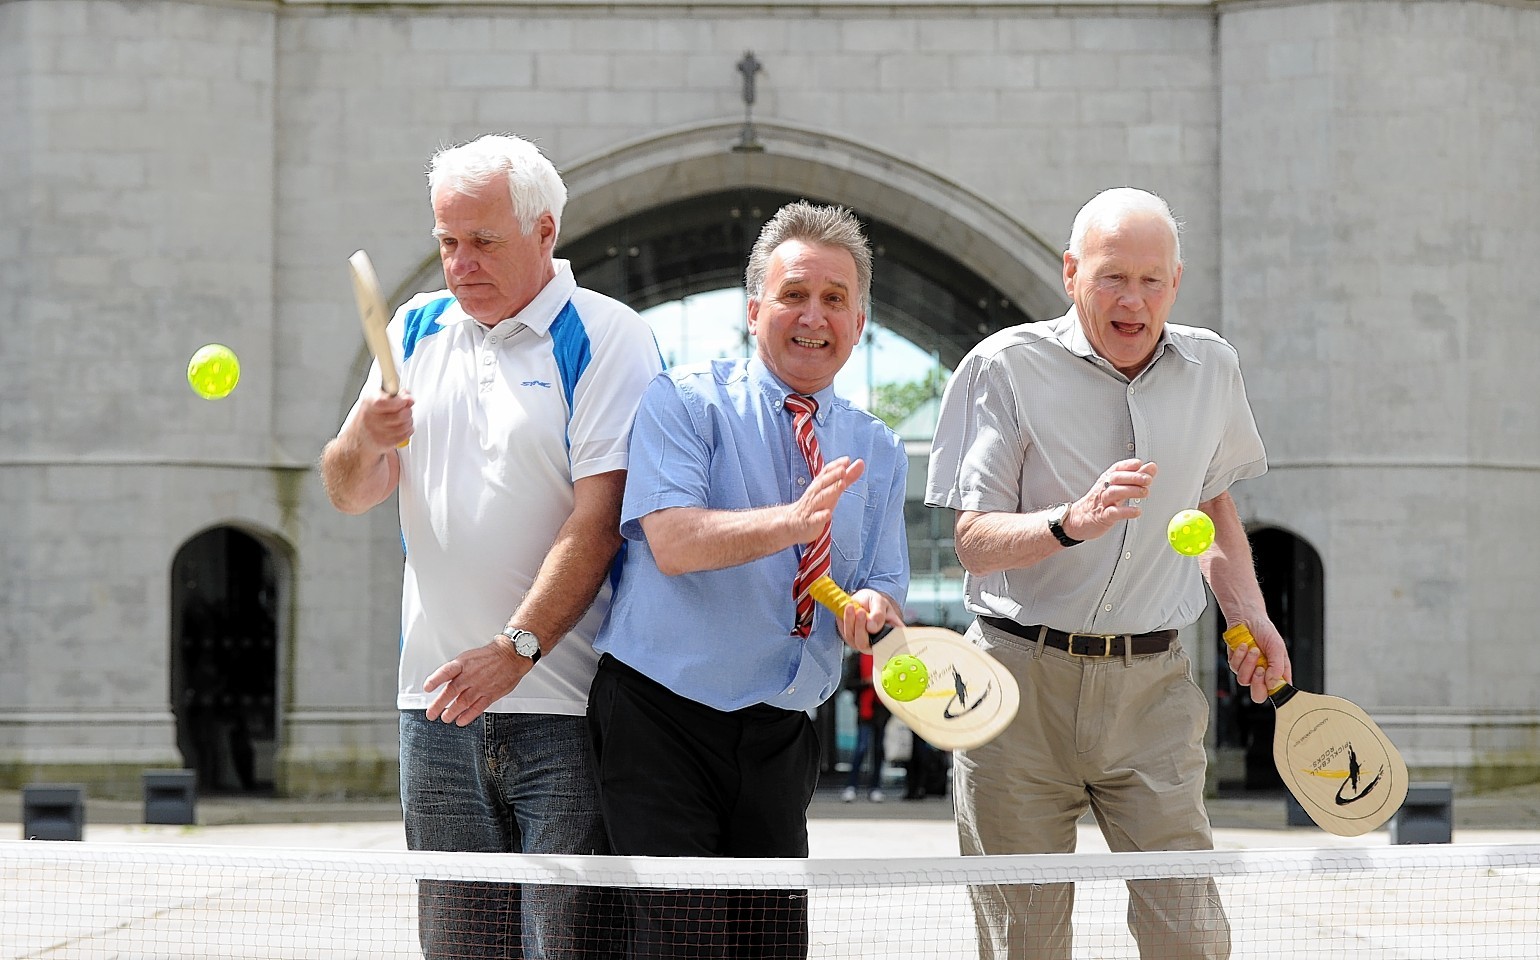 George Yule, executive vice chairman of Aberdeen Football Club, playing pickleball with Peter Ewen (left) and Adam Chisholm at the launch of Golden Games 2015 at Marischal College Quad. Picture by Kevin Emslie